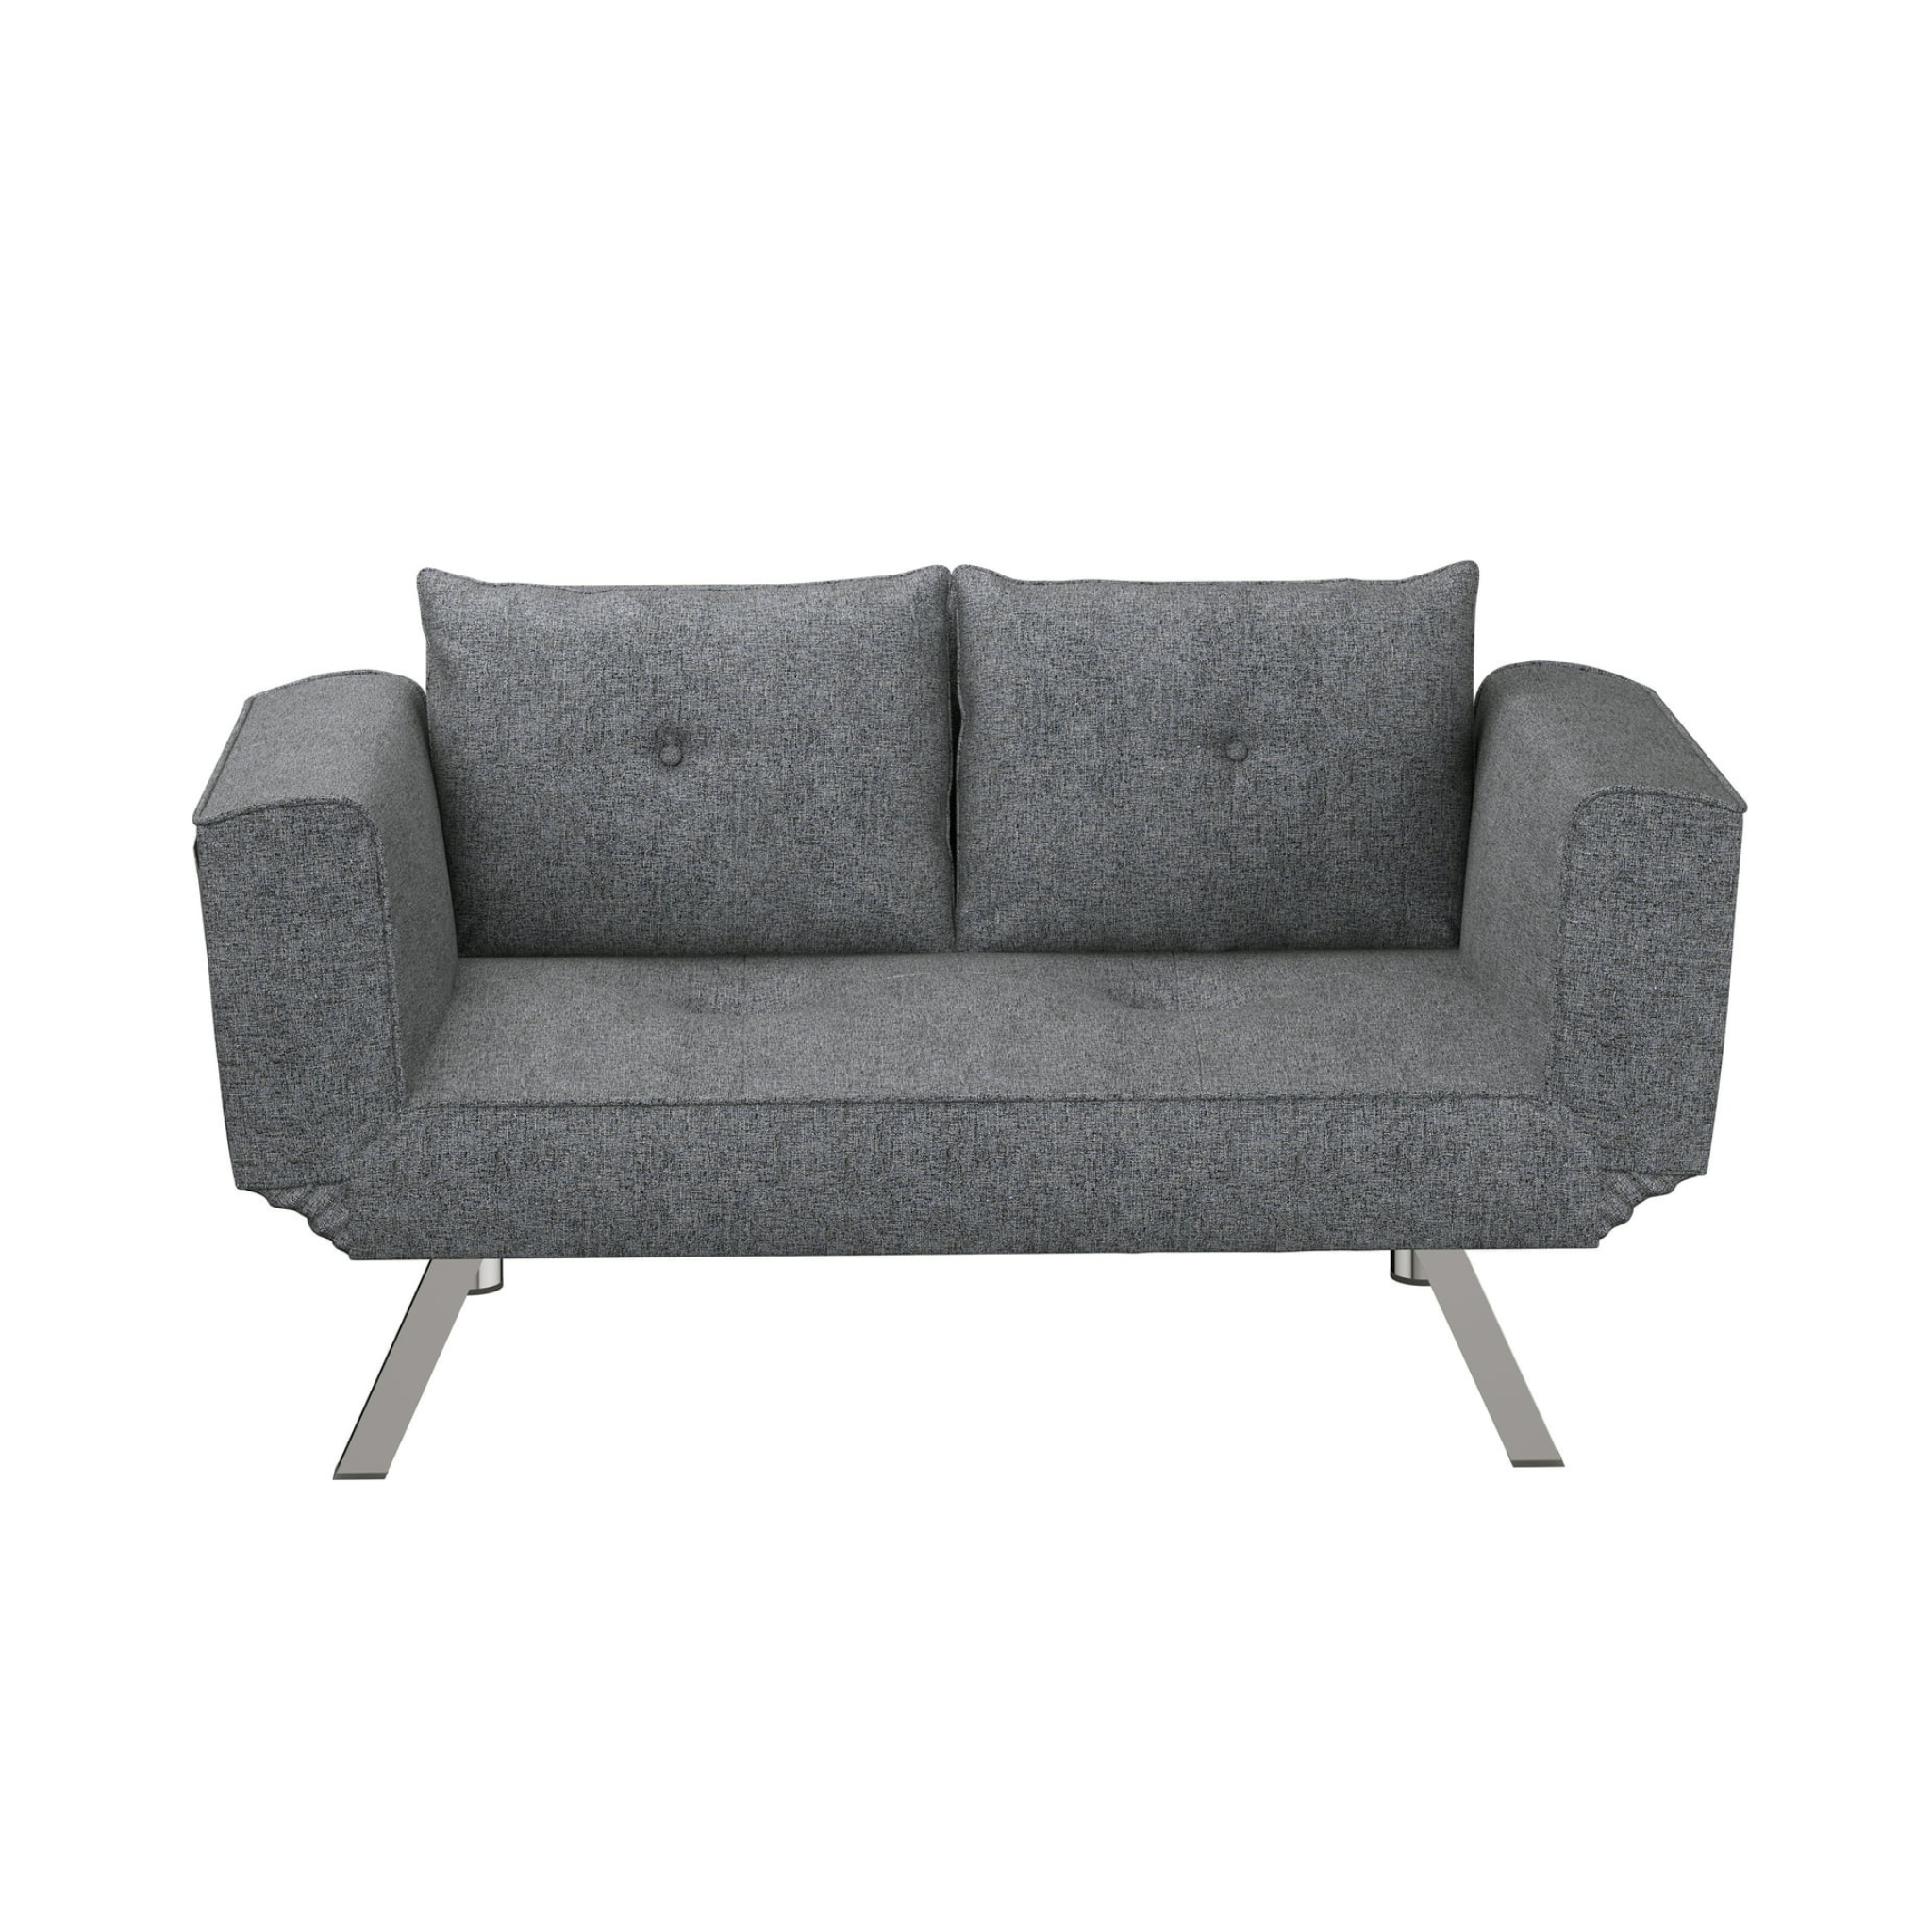 Serta Pacific Modern Loveseat with Sleeper (2 Colors)